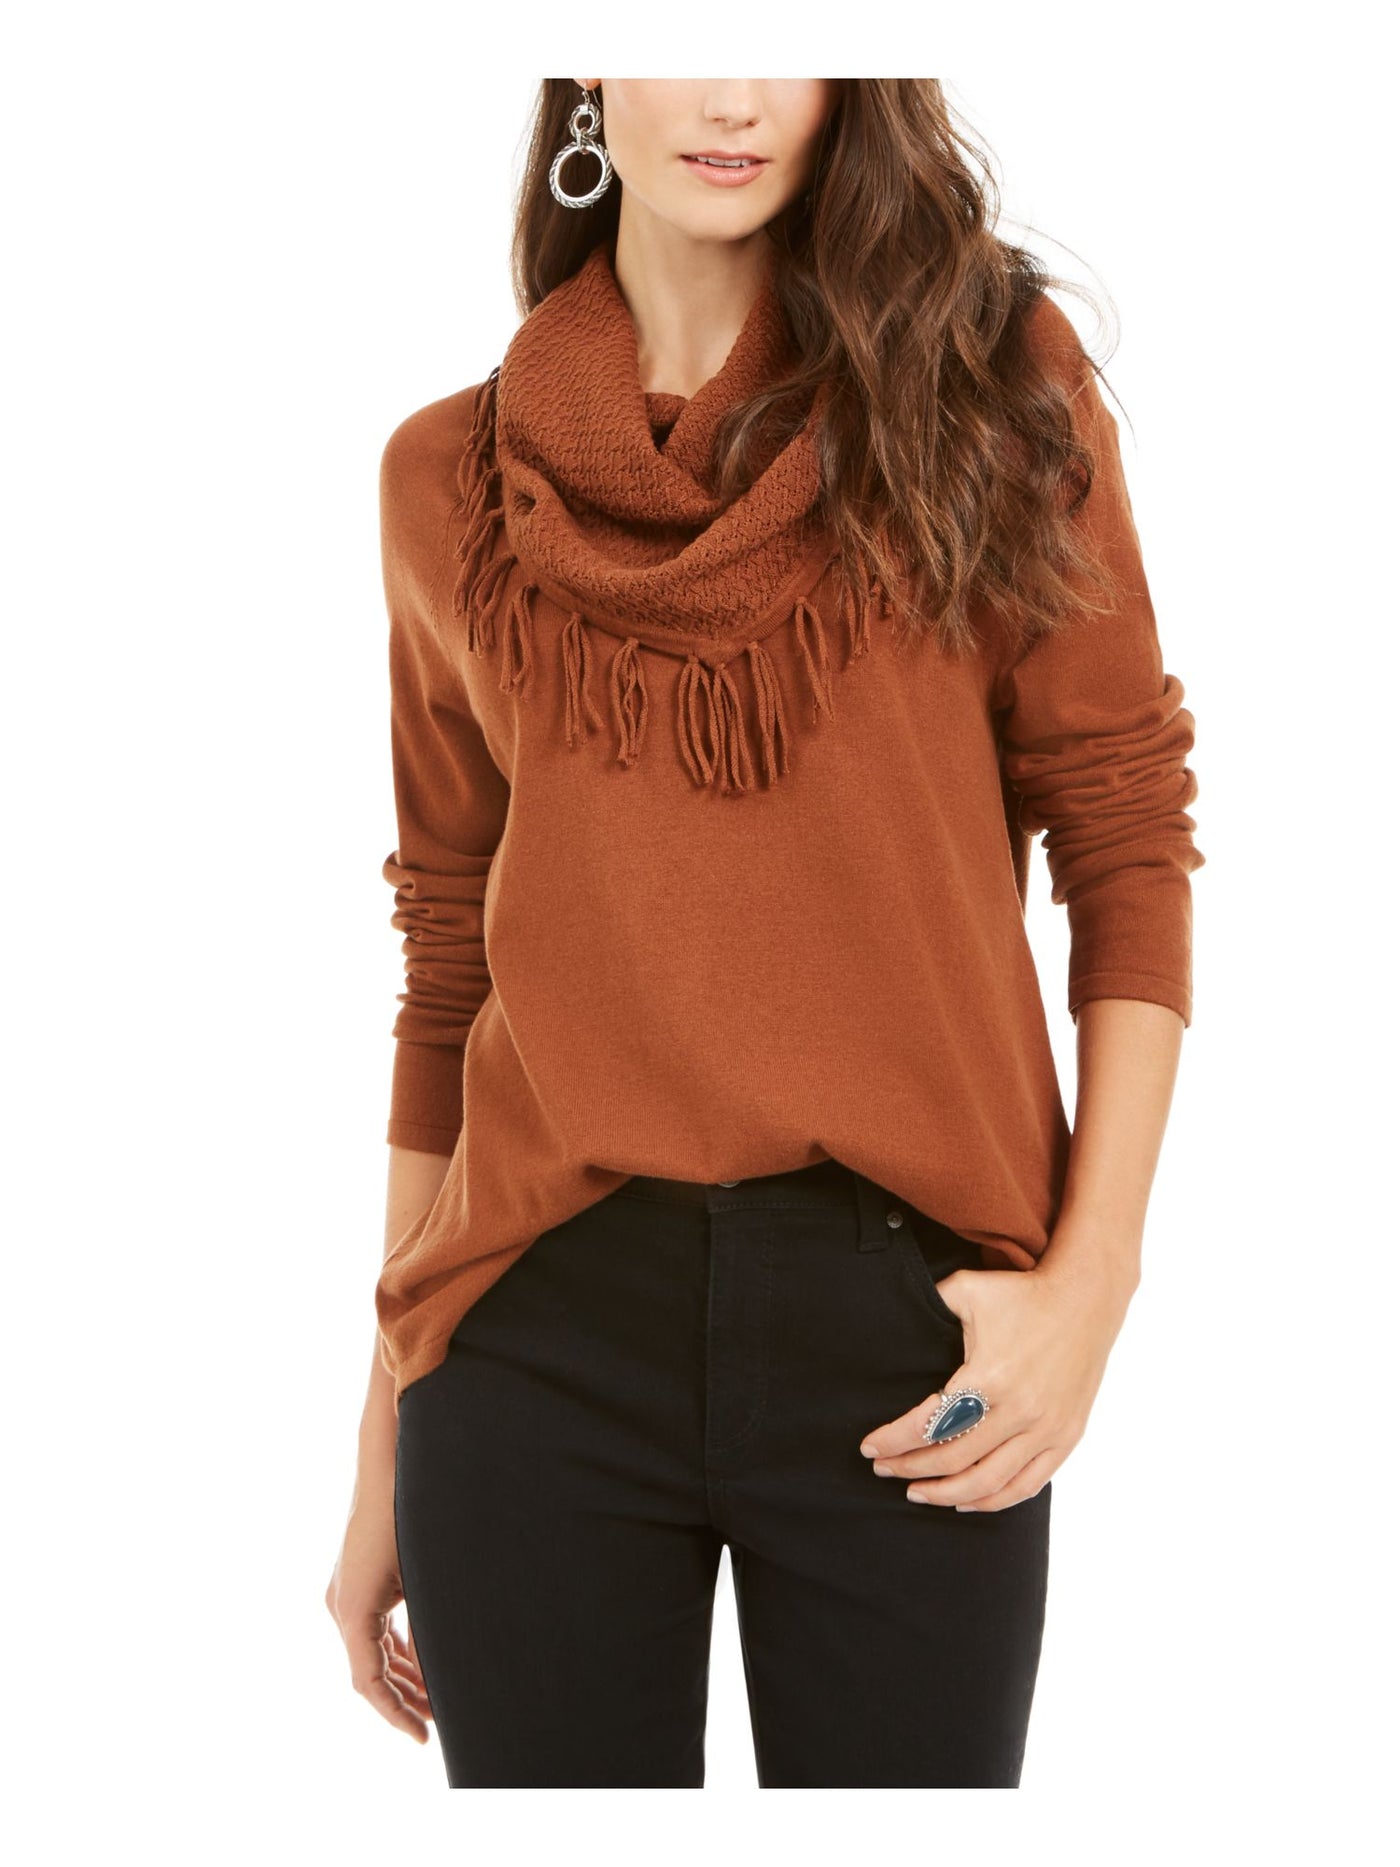 STYLE & COMPANY Womens Brown Fringed Cowl Neck Sweater Petites PXL